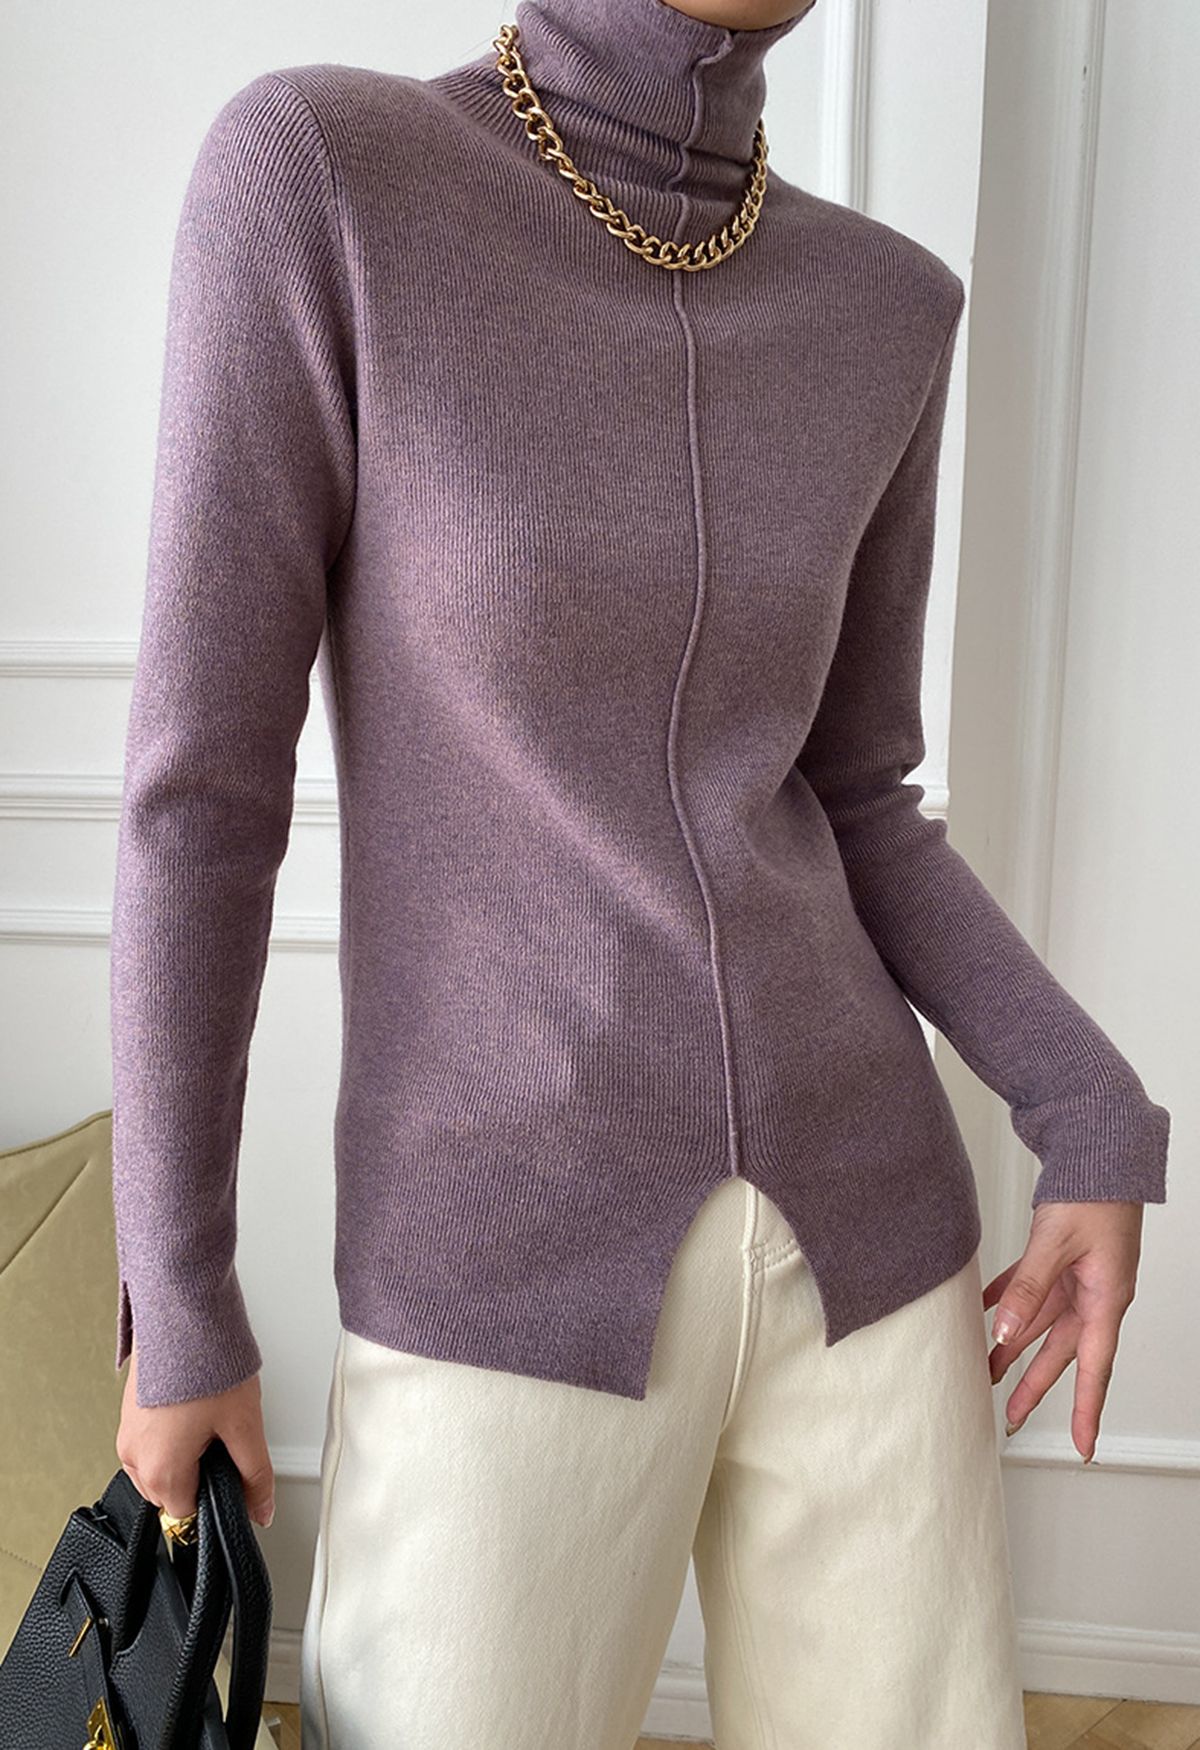 Seam Detail High Neck Slit Knit Top in Mauve